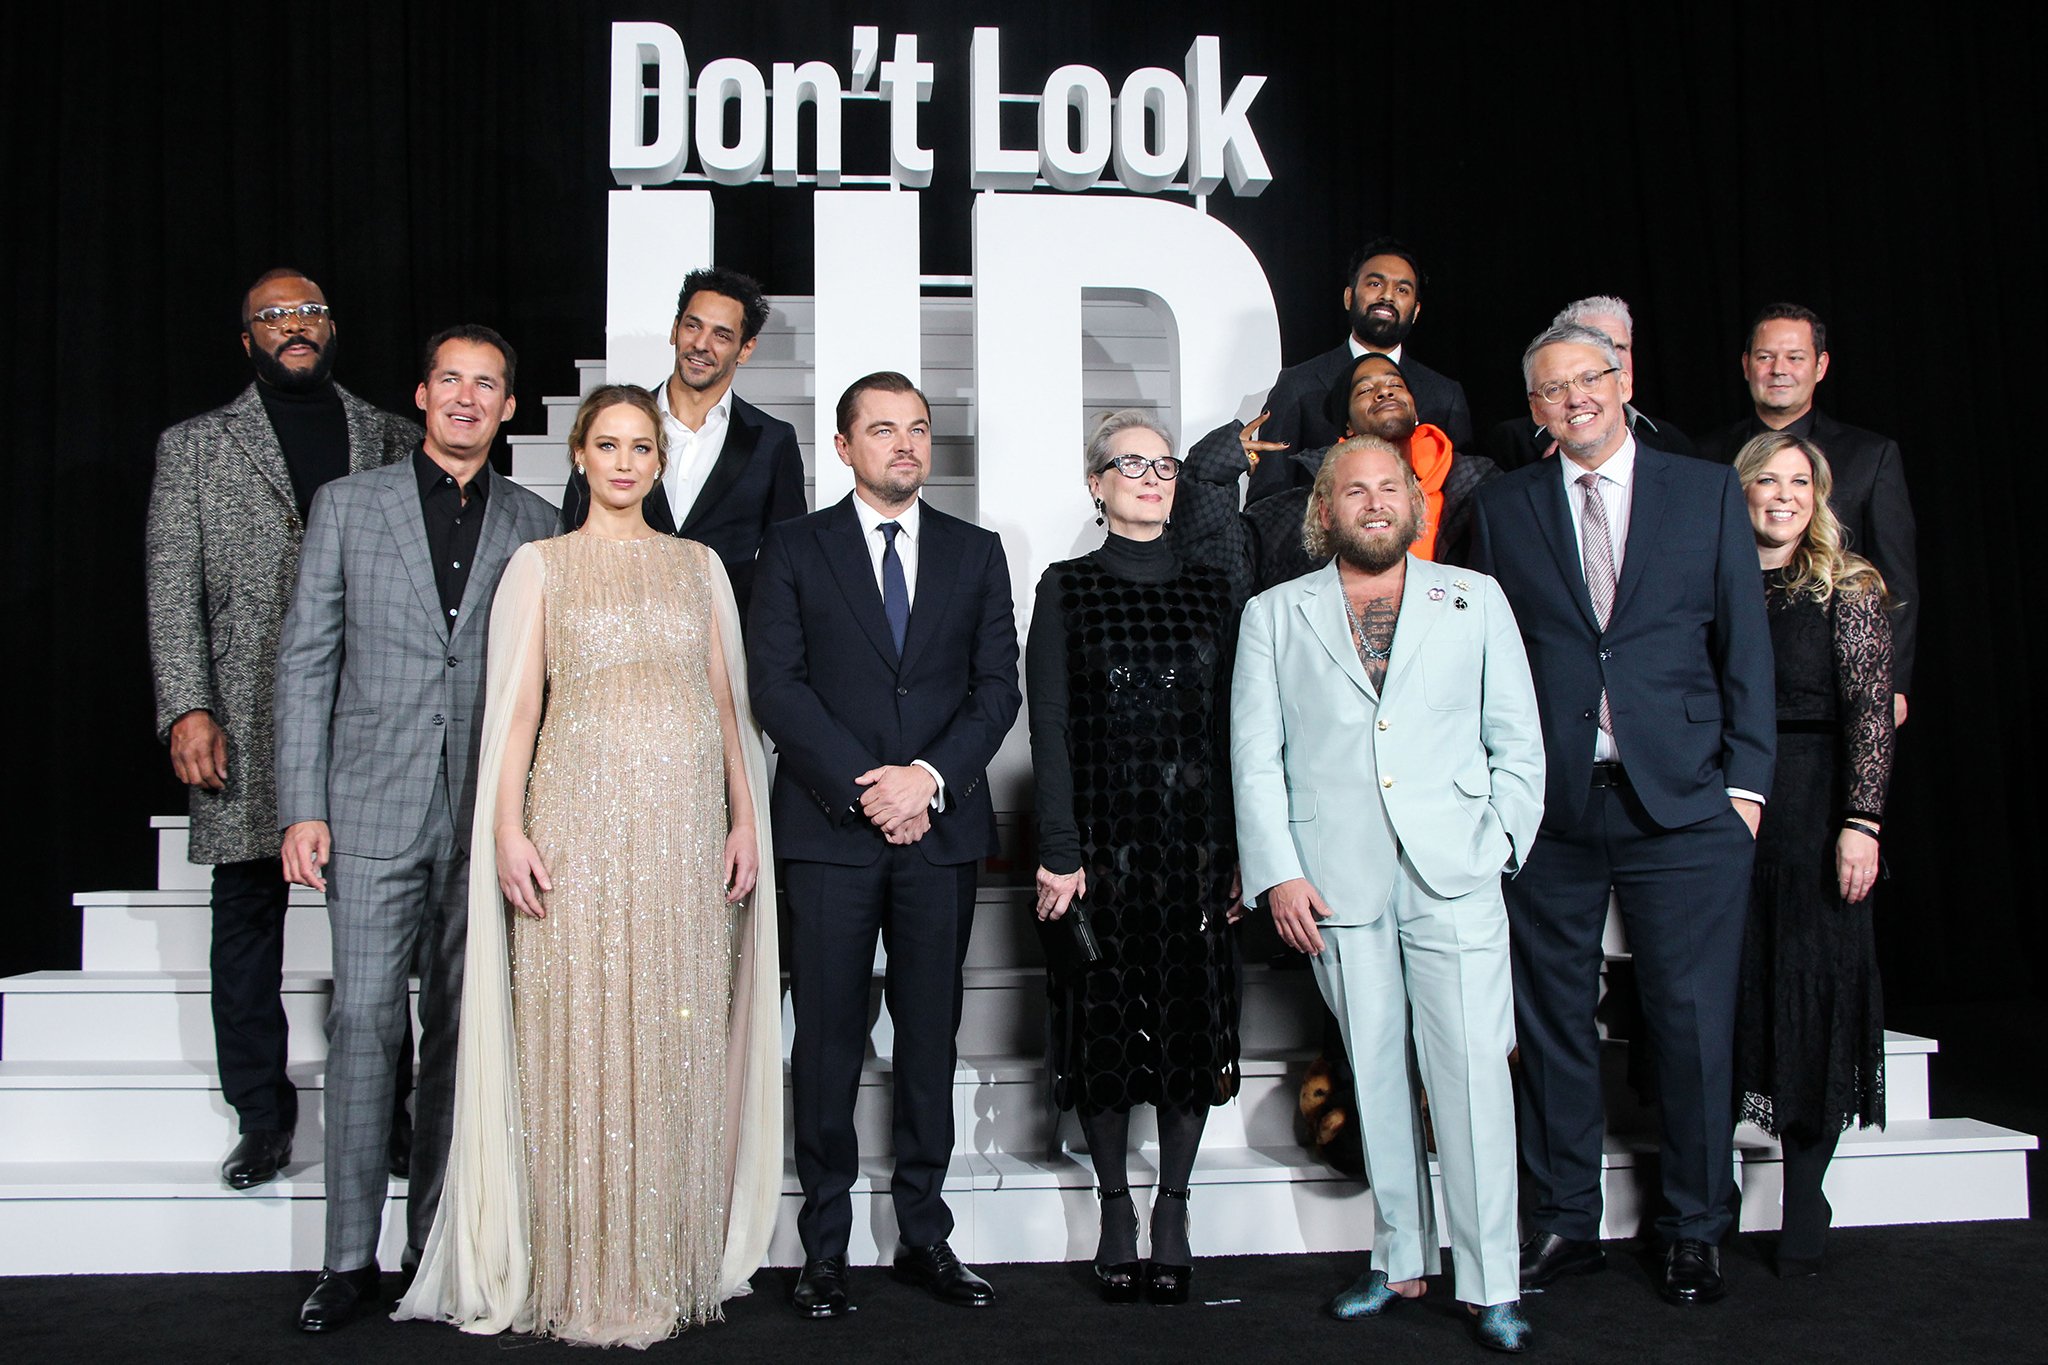 The star-studded cast of the satirical sci-fi Netflix movie, Don't Look Up